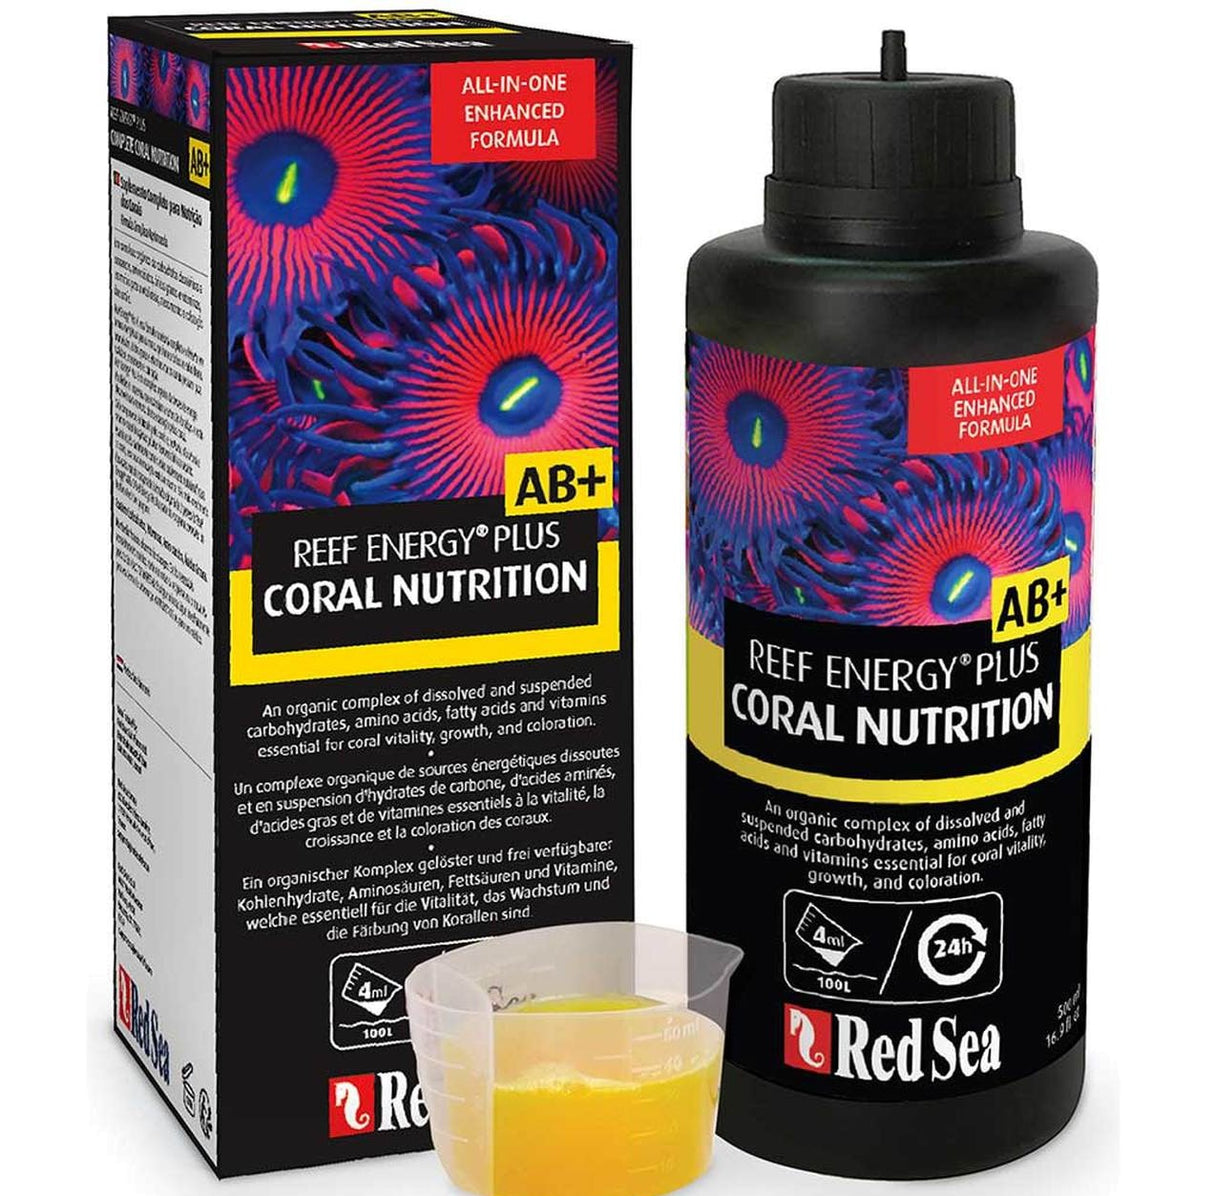 Red Sea Reef Energy AB+ Coral Nutrition